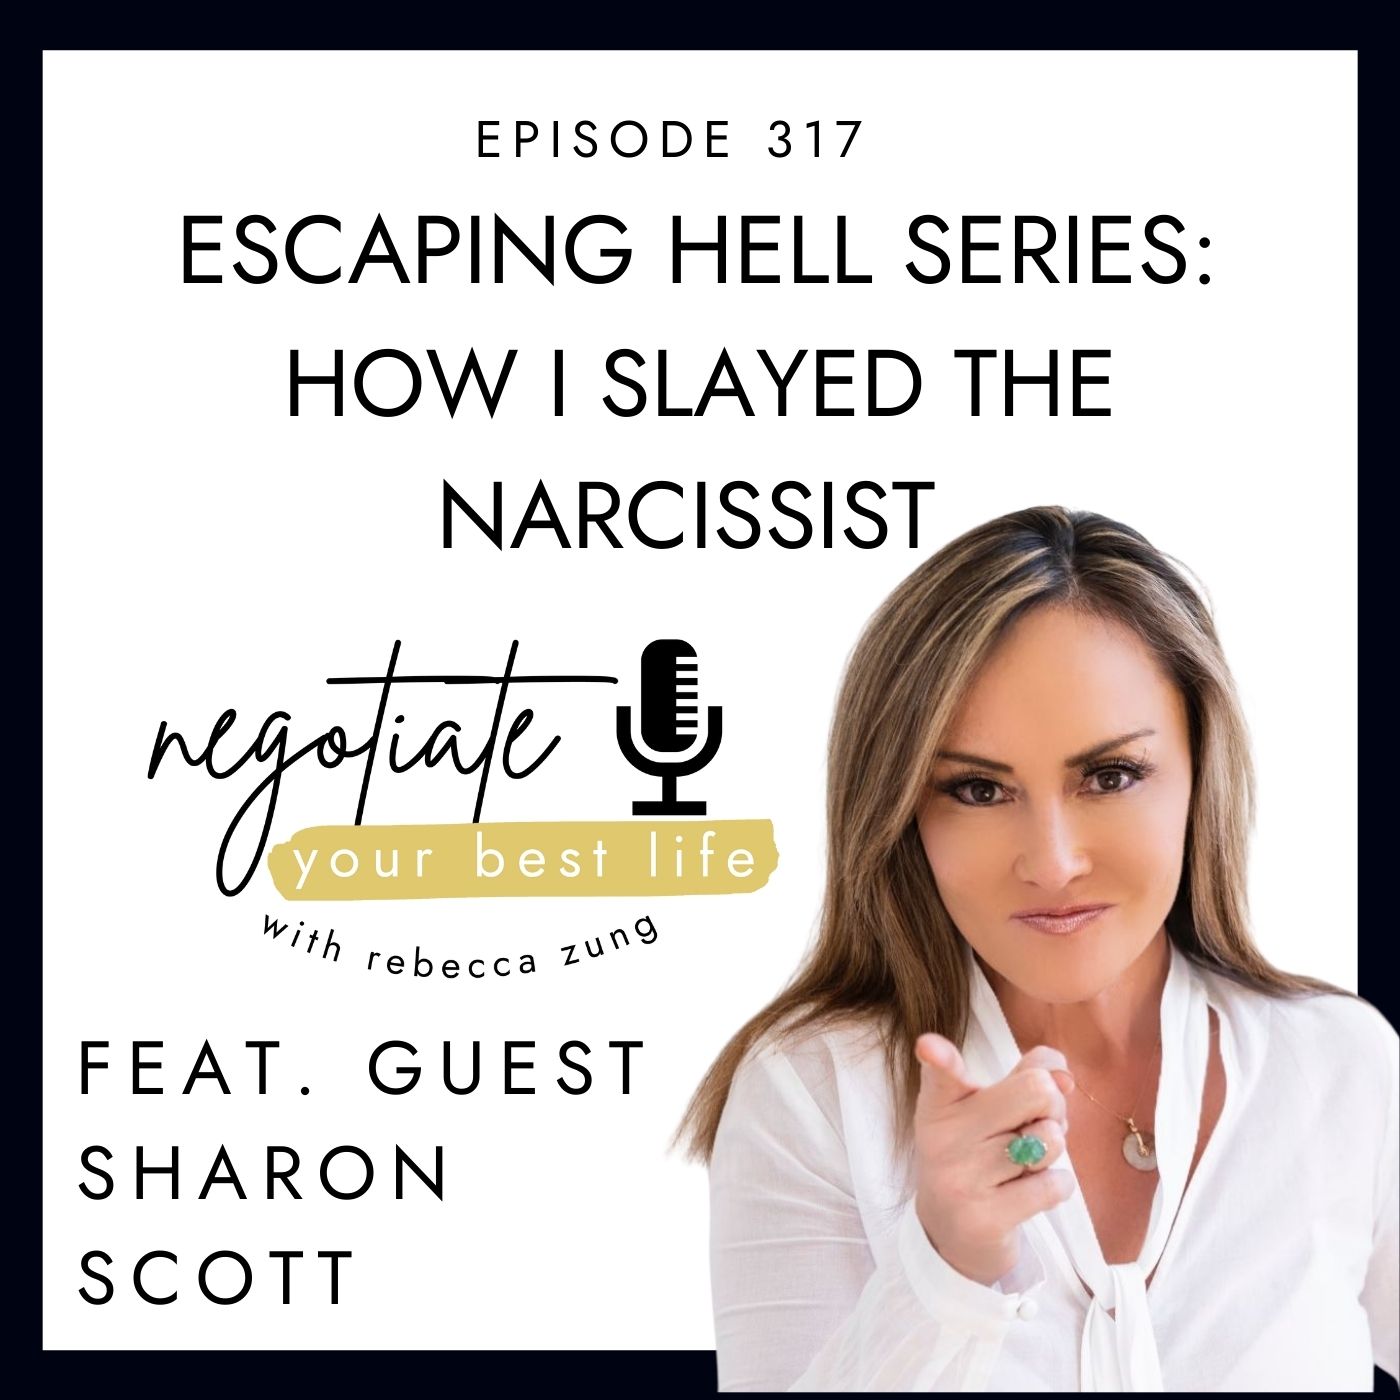 Escaping Hell Series:  How I Slayed the Narcissist with Sharon Scott on Negotiate Your Best Life with Rebecca Zung #317